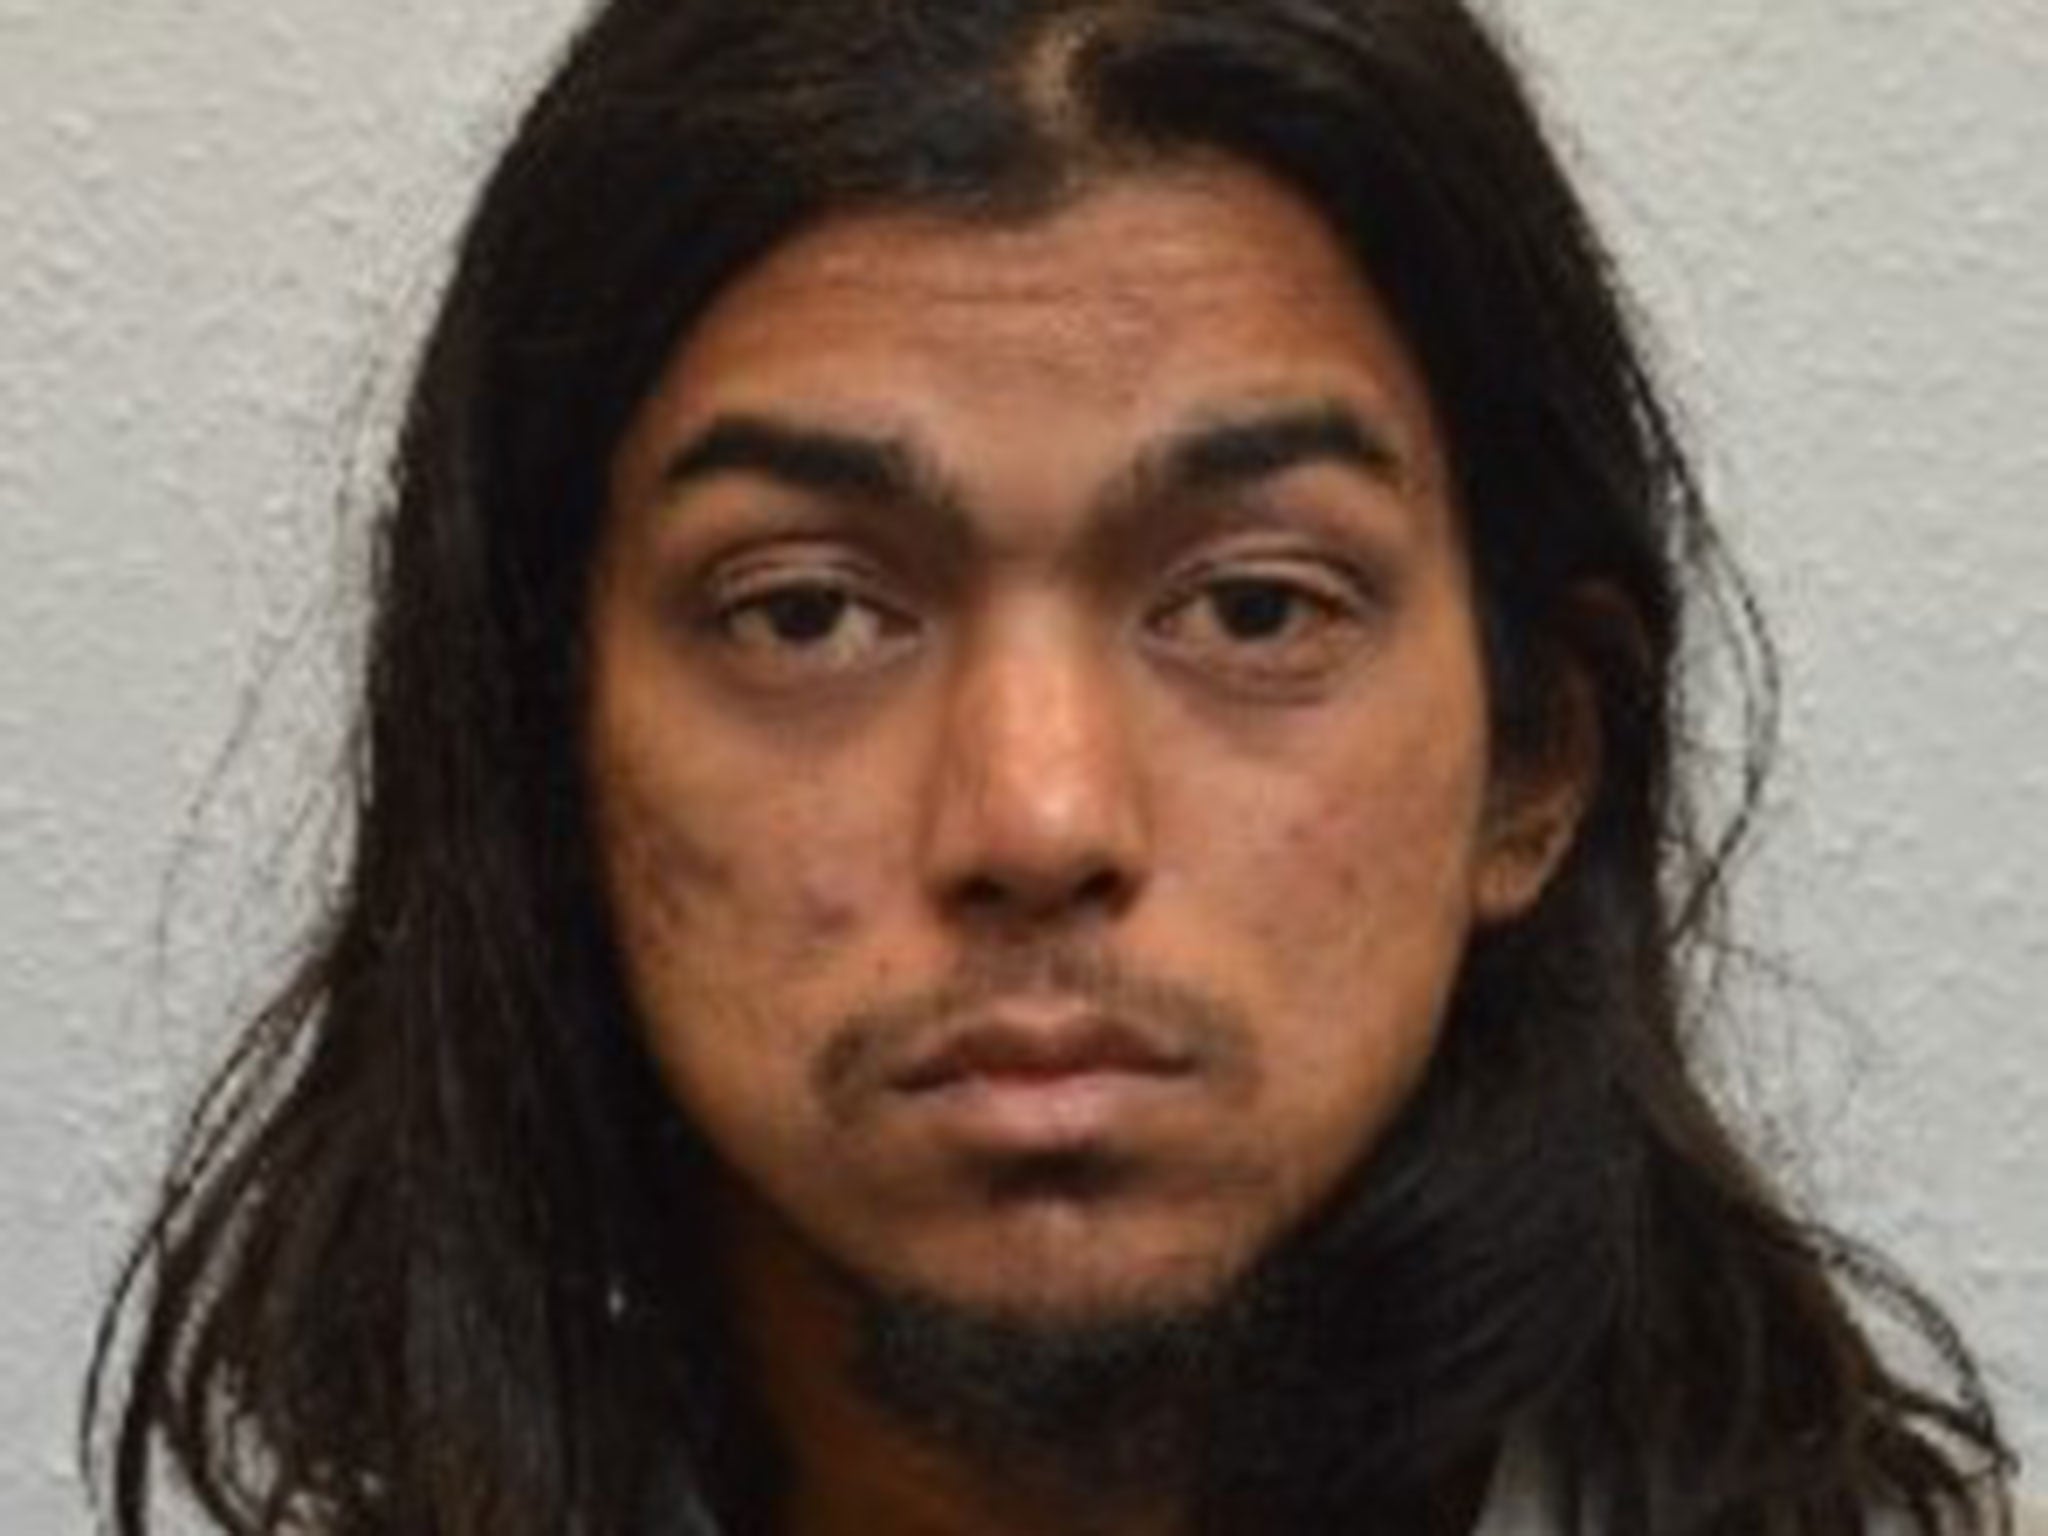 Isis fanatic who planned to bomb Downing Street and behead Theresa May convicted